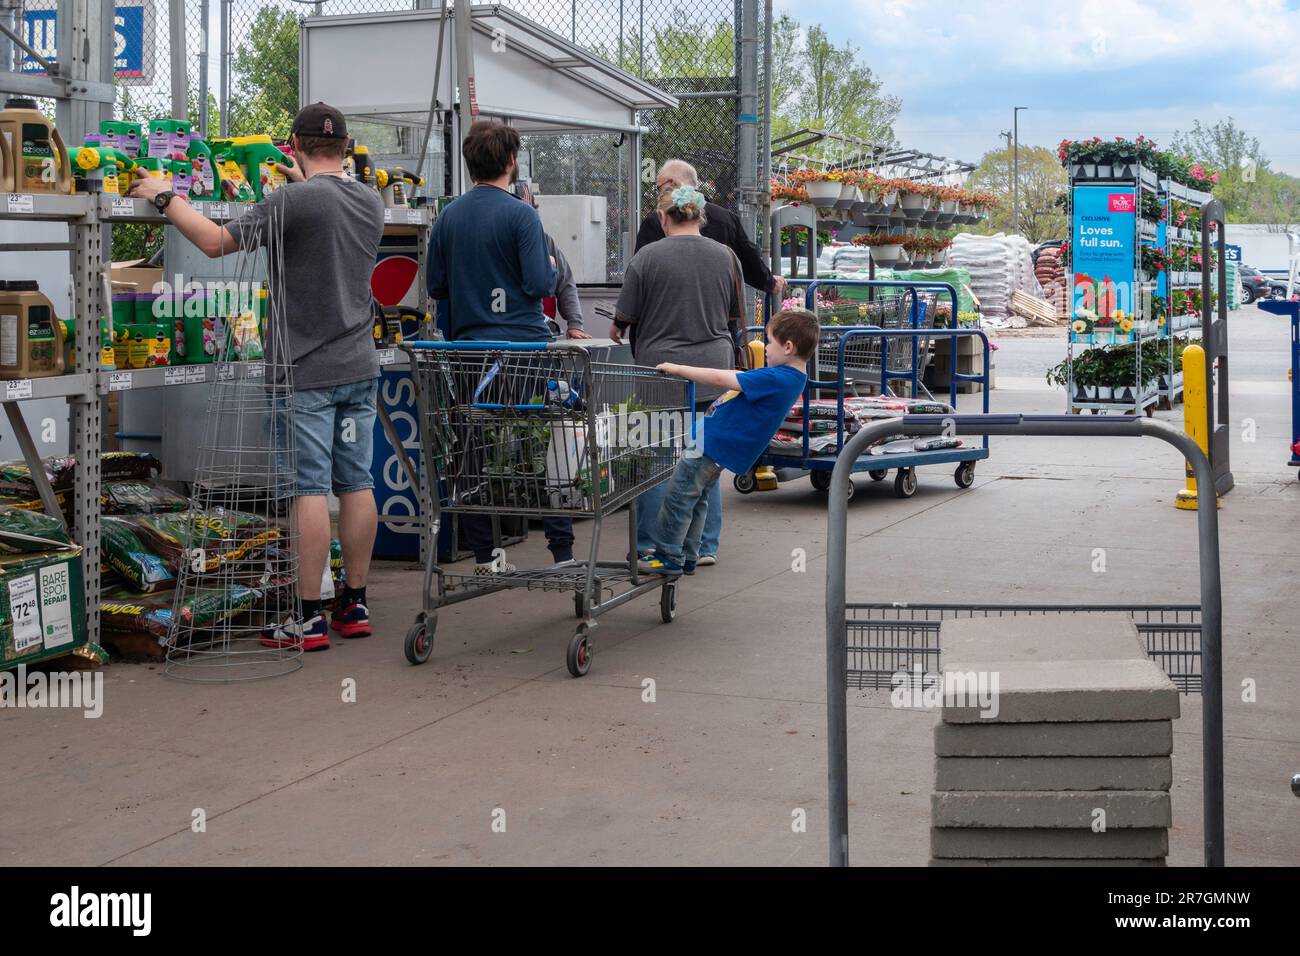 Customers stand in line to pay for plants and merchandise at cashier’s stand at Lowe’s garden center in Wichita, Kansas, USA. Stock Photo